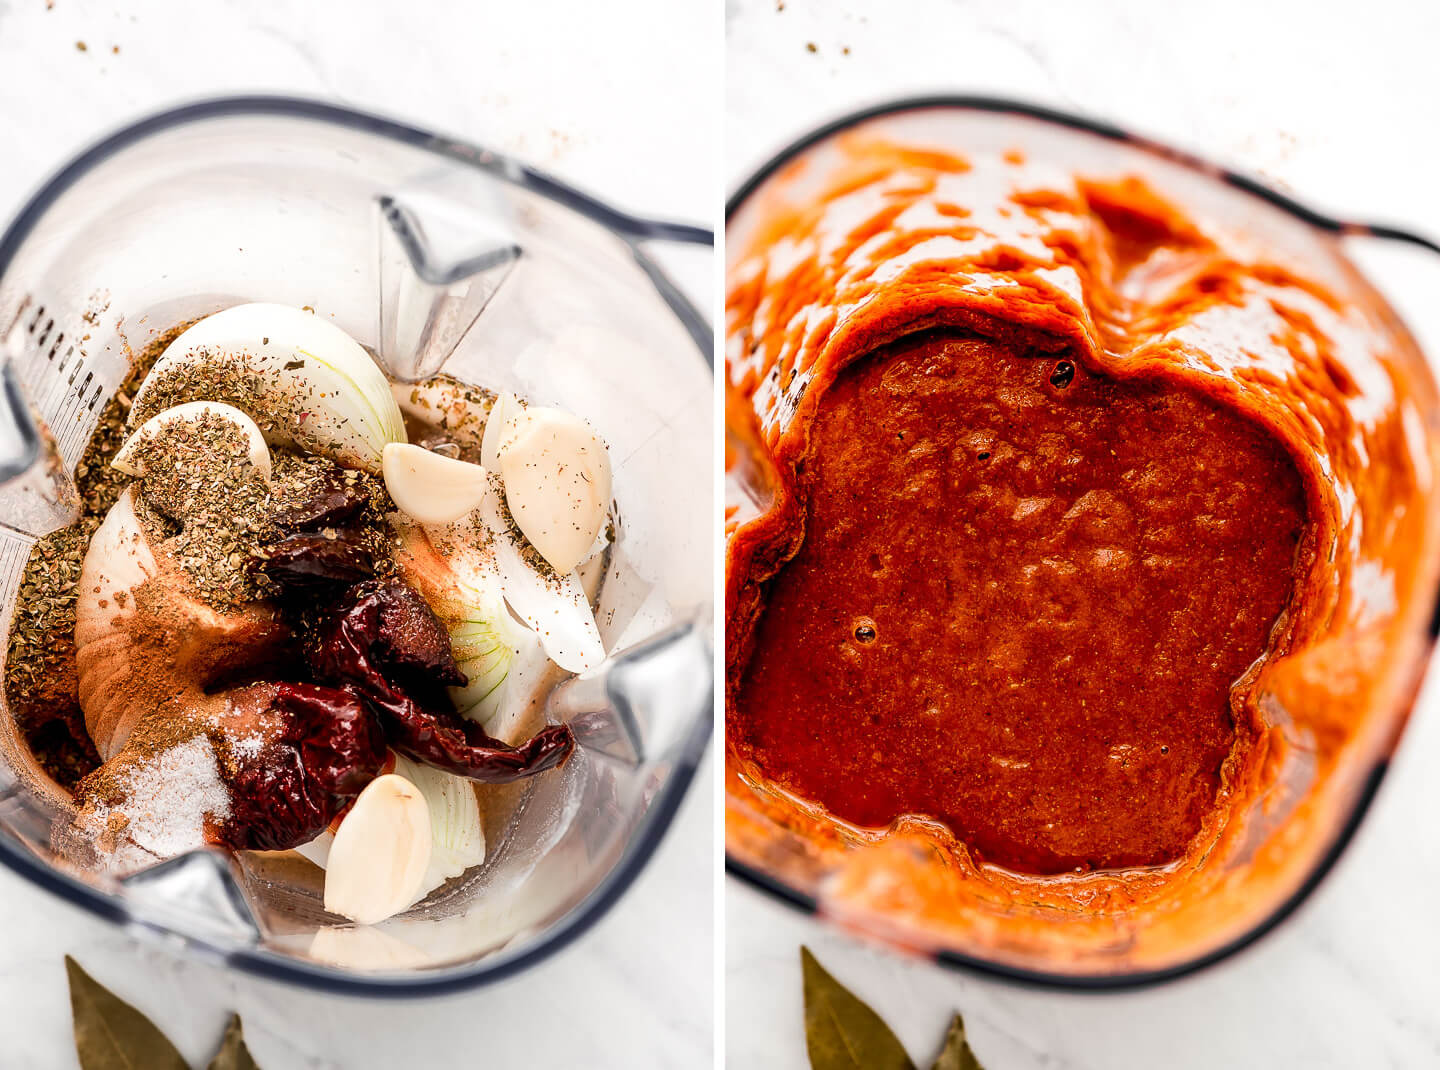 Diptych- A blender with onions, garlic, chipotle chilies, and seasonings; a pureed red sauce in a blender.